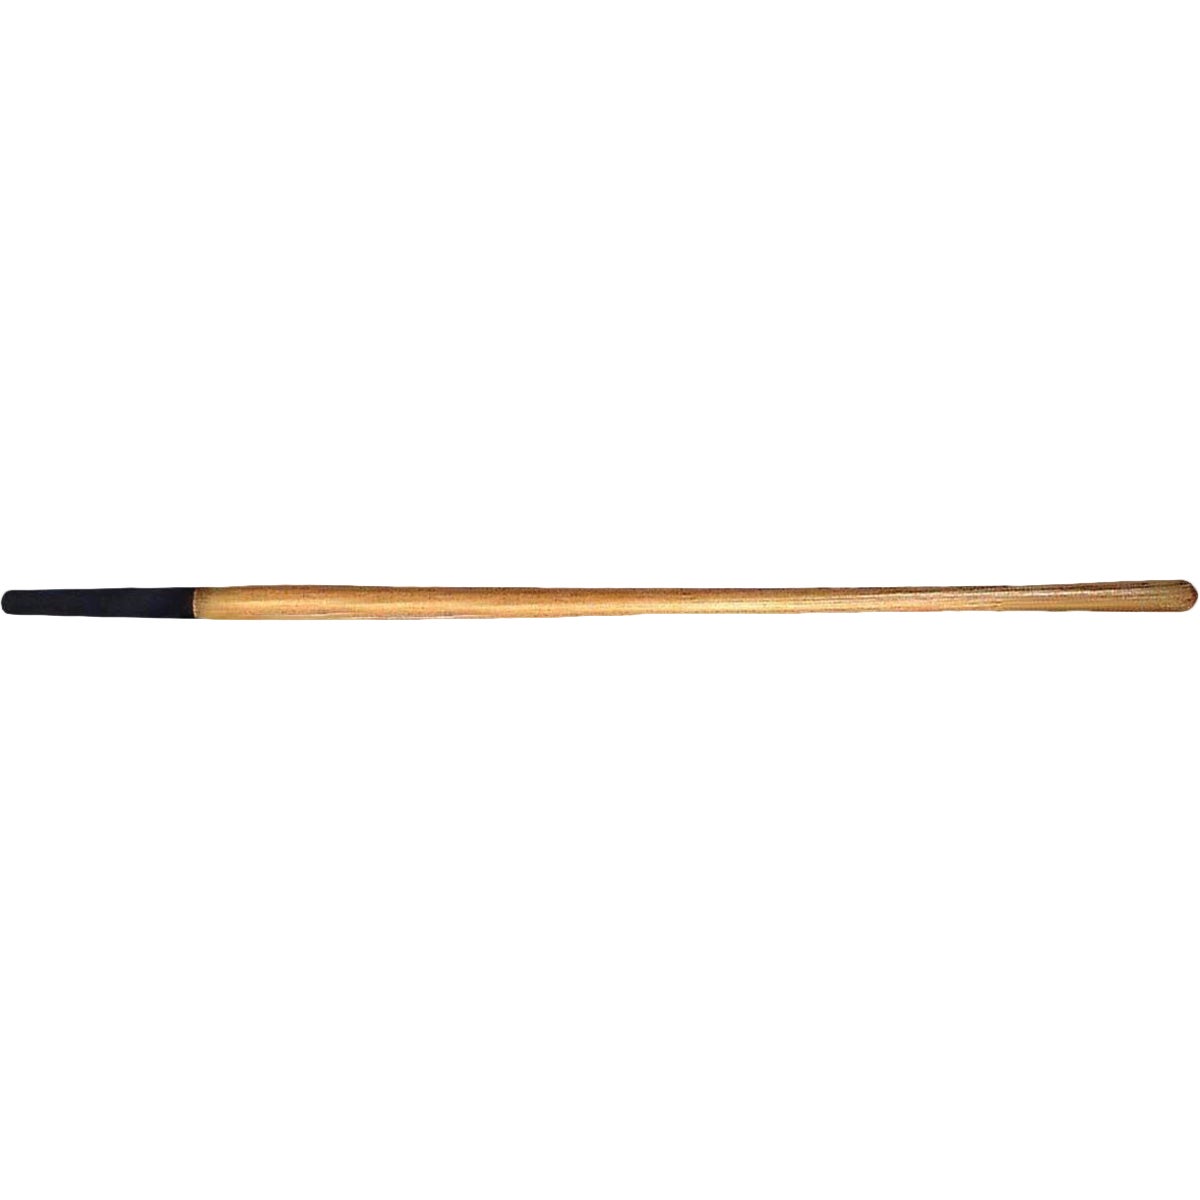 Item 702387, Replacement wood handle for a bent manure fork, barley, or head fork.